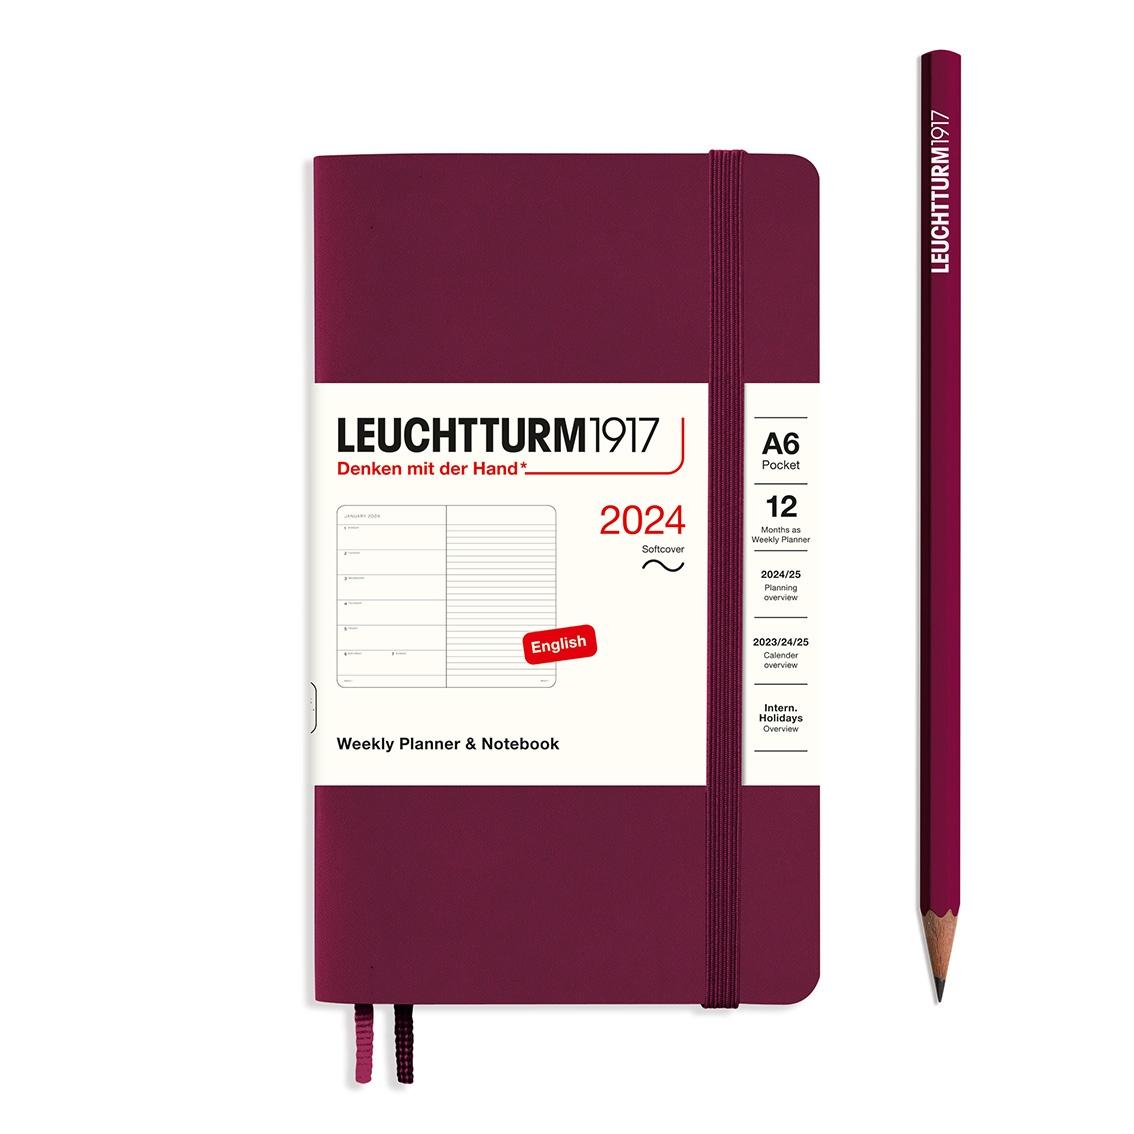 softcover weekly planner and notebook 2024 pocket port red by leuchtturm1917